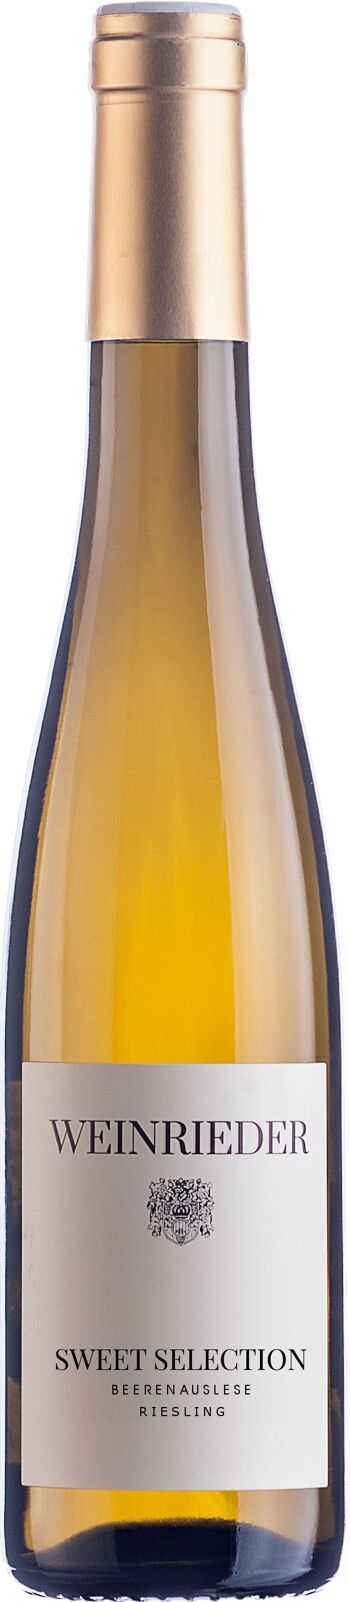 Sélection sucrée - Beerenauslese Riesling 2014